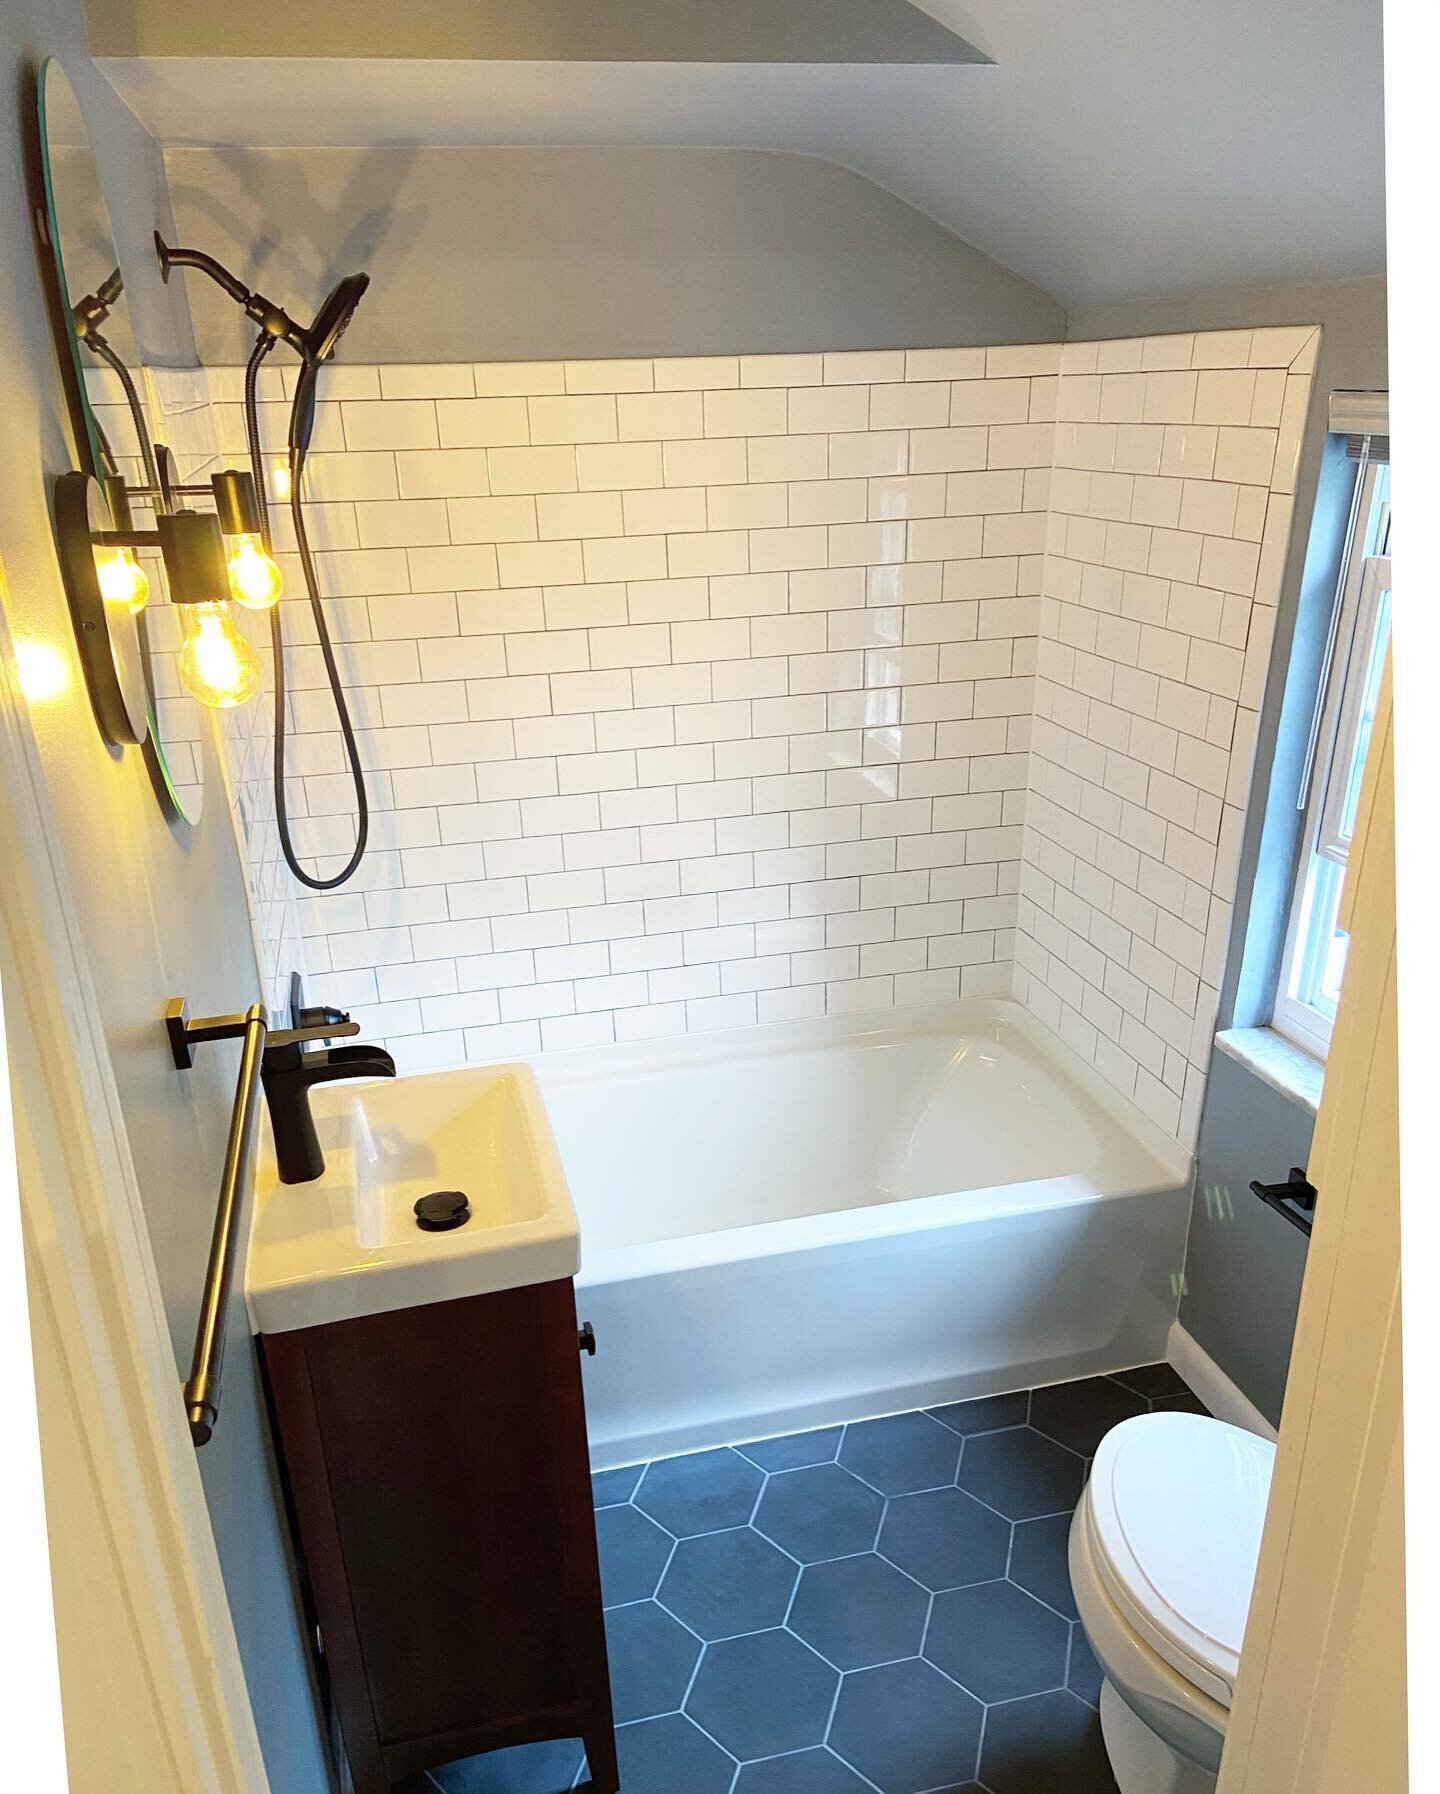 Full bathroom renovation with all new fixtures.

We wrapped up this Verona bathroom renovation back in June. Just like the homeowners, we love the outcome. Our favorite finishes? The floor tile from our friends at @ceramiche_tile and the sink spout a